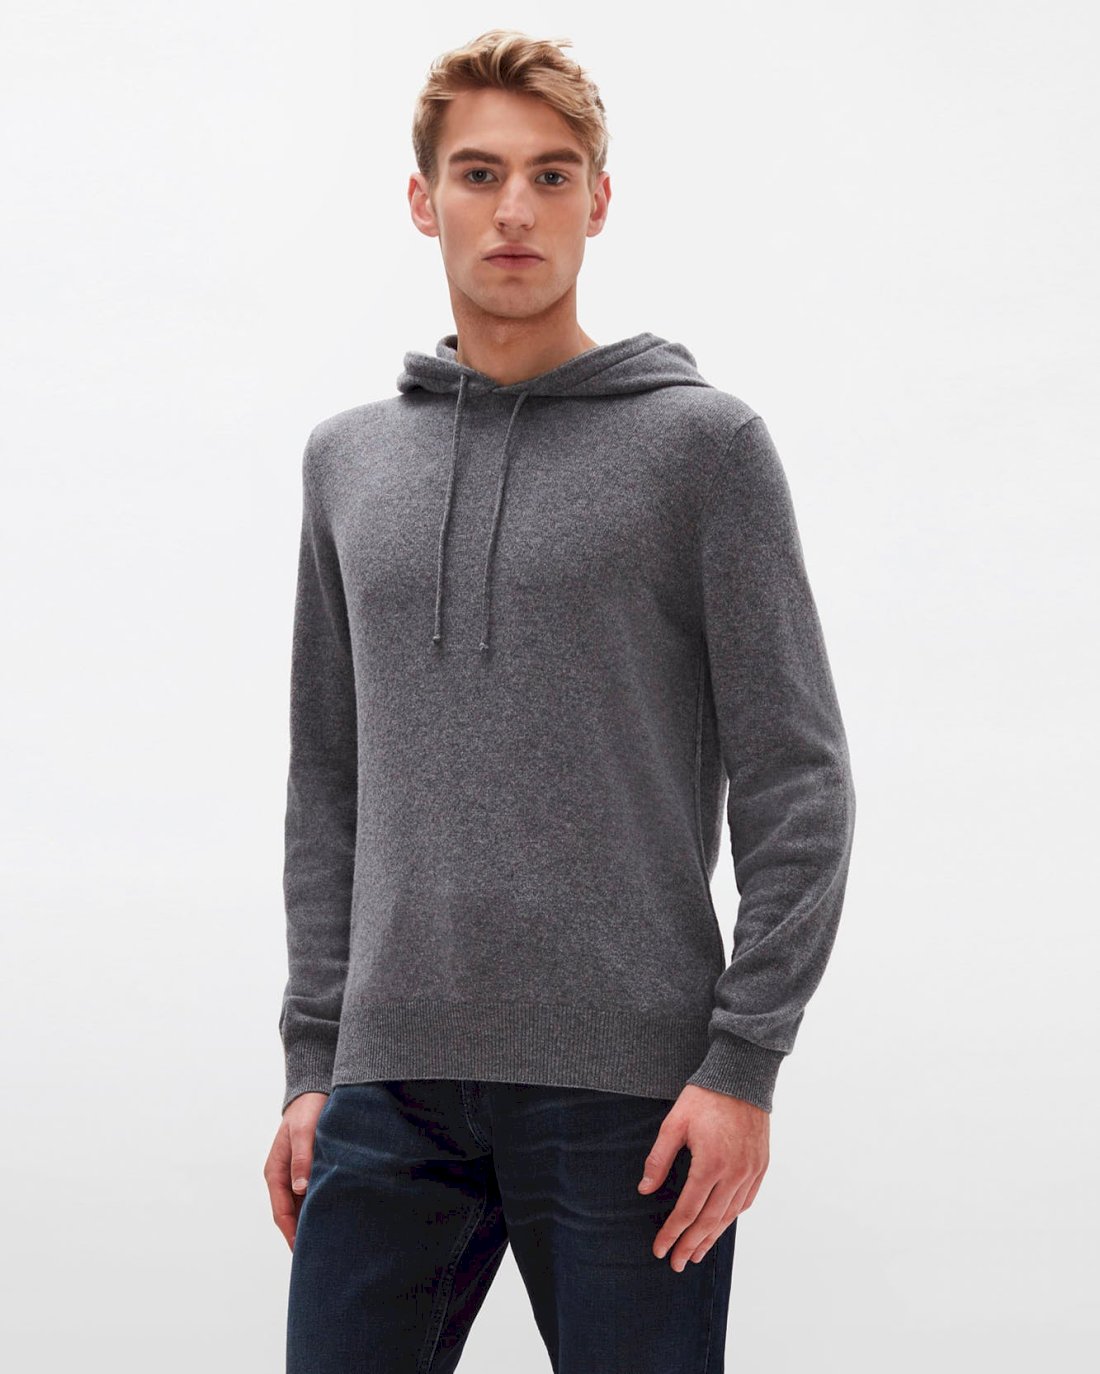 Cashmere Hoodie in Grey | 7 For All Mankind